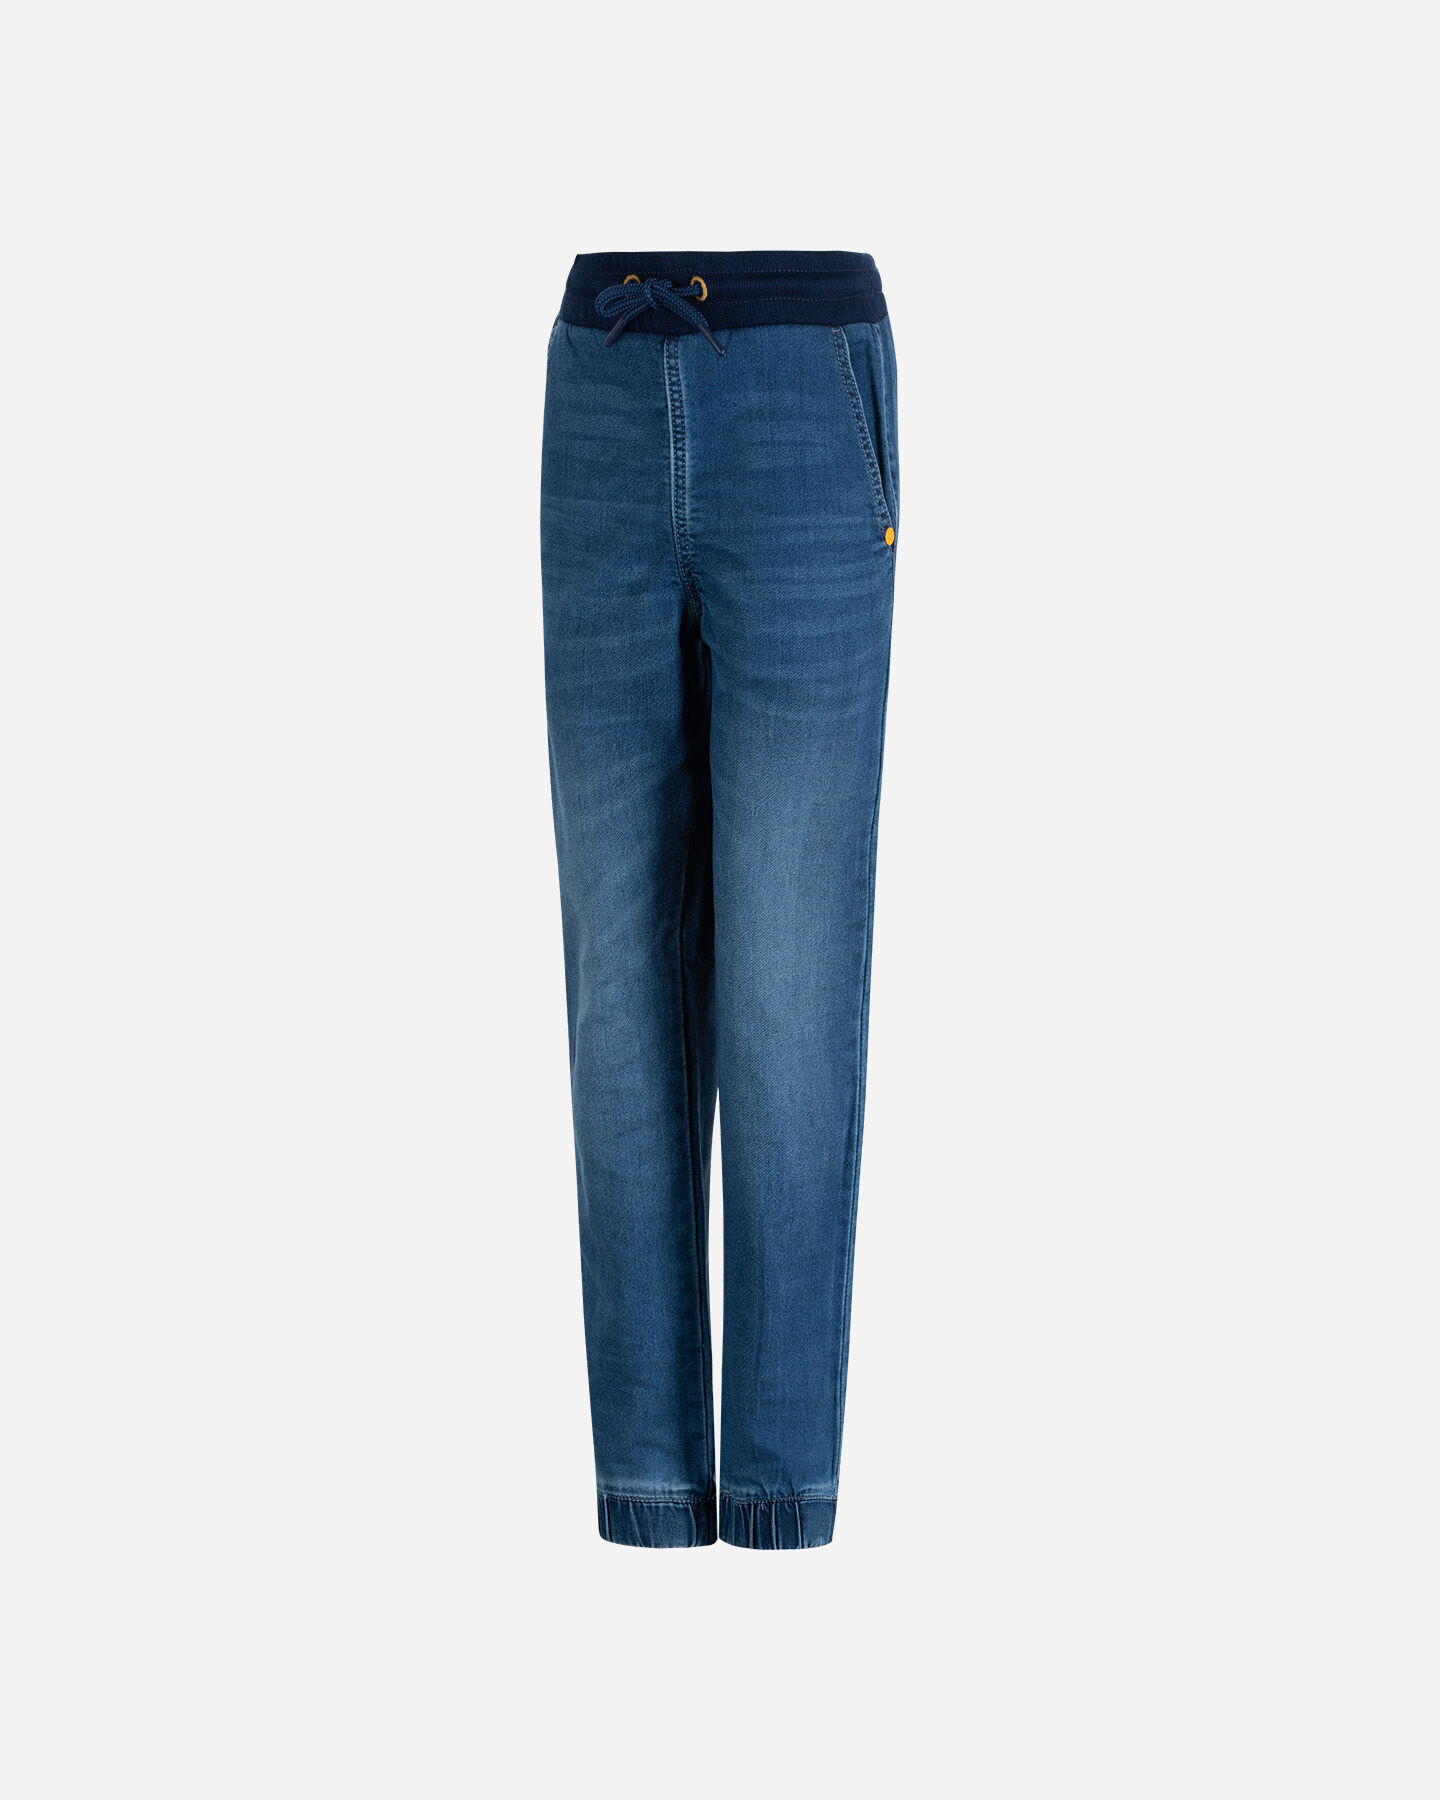  Jeans ADMIRAL LIFESTYLE JR S4106381|MDBLUE|12A scatto 0